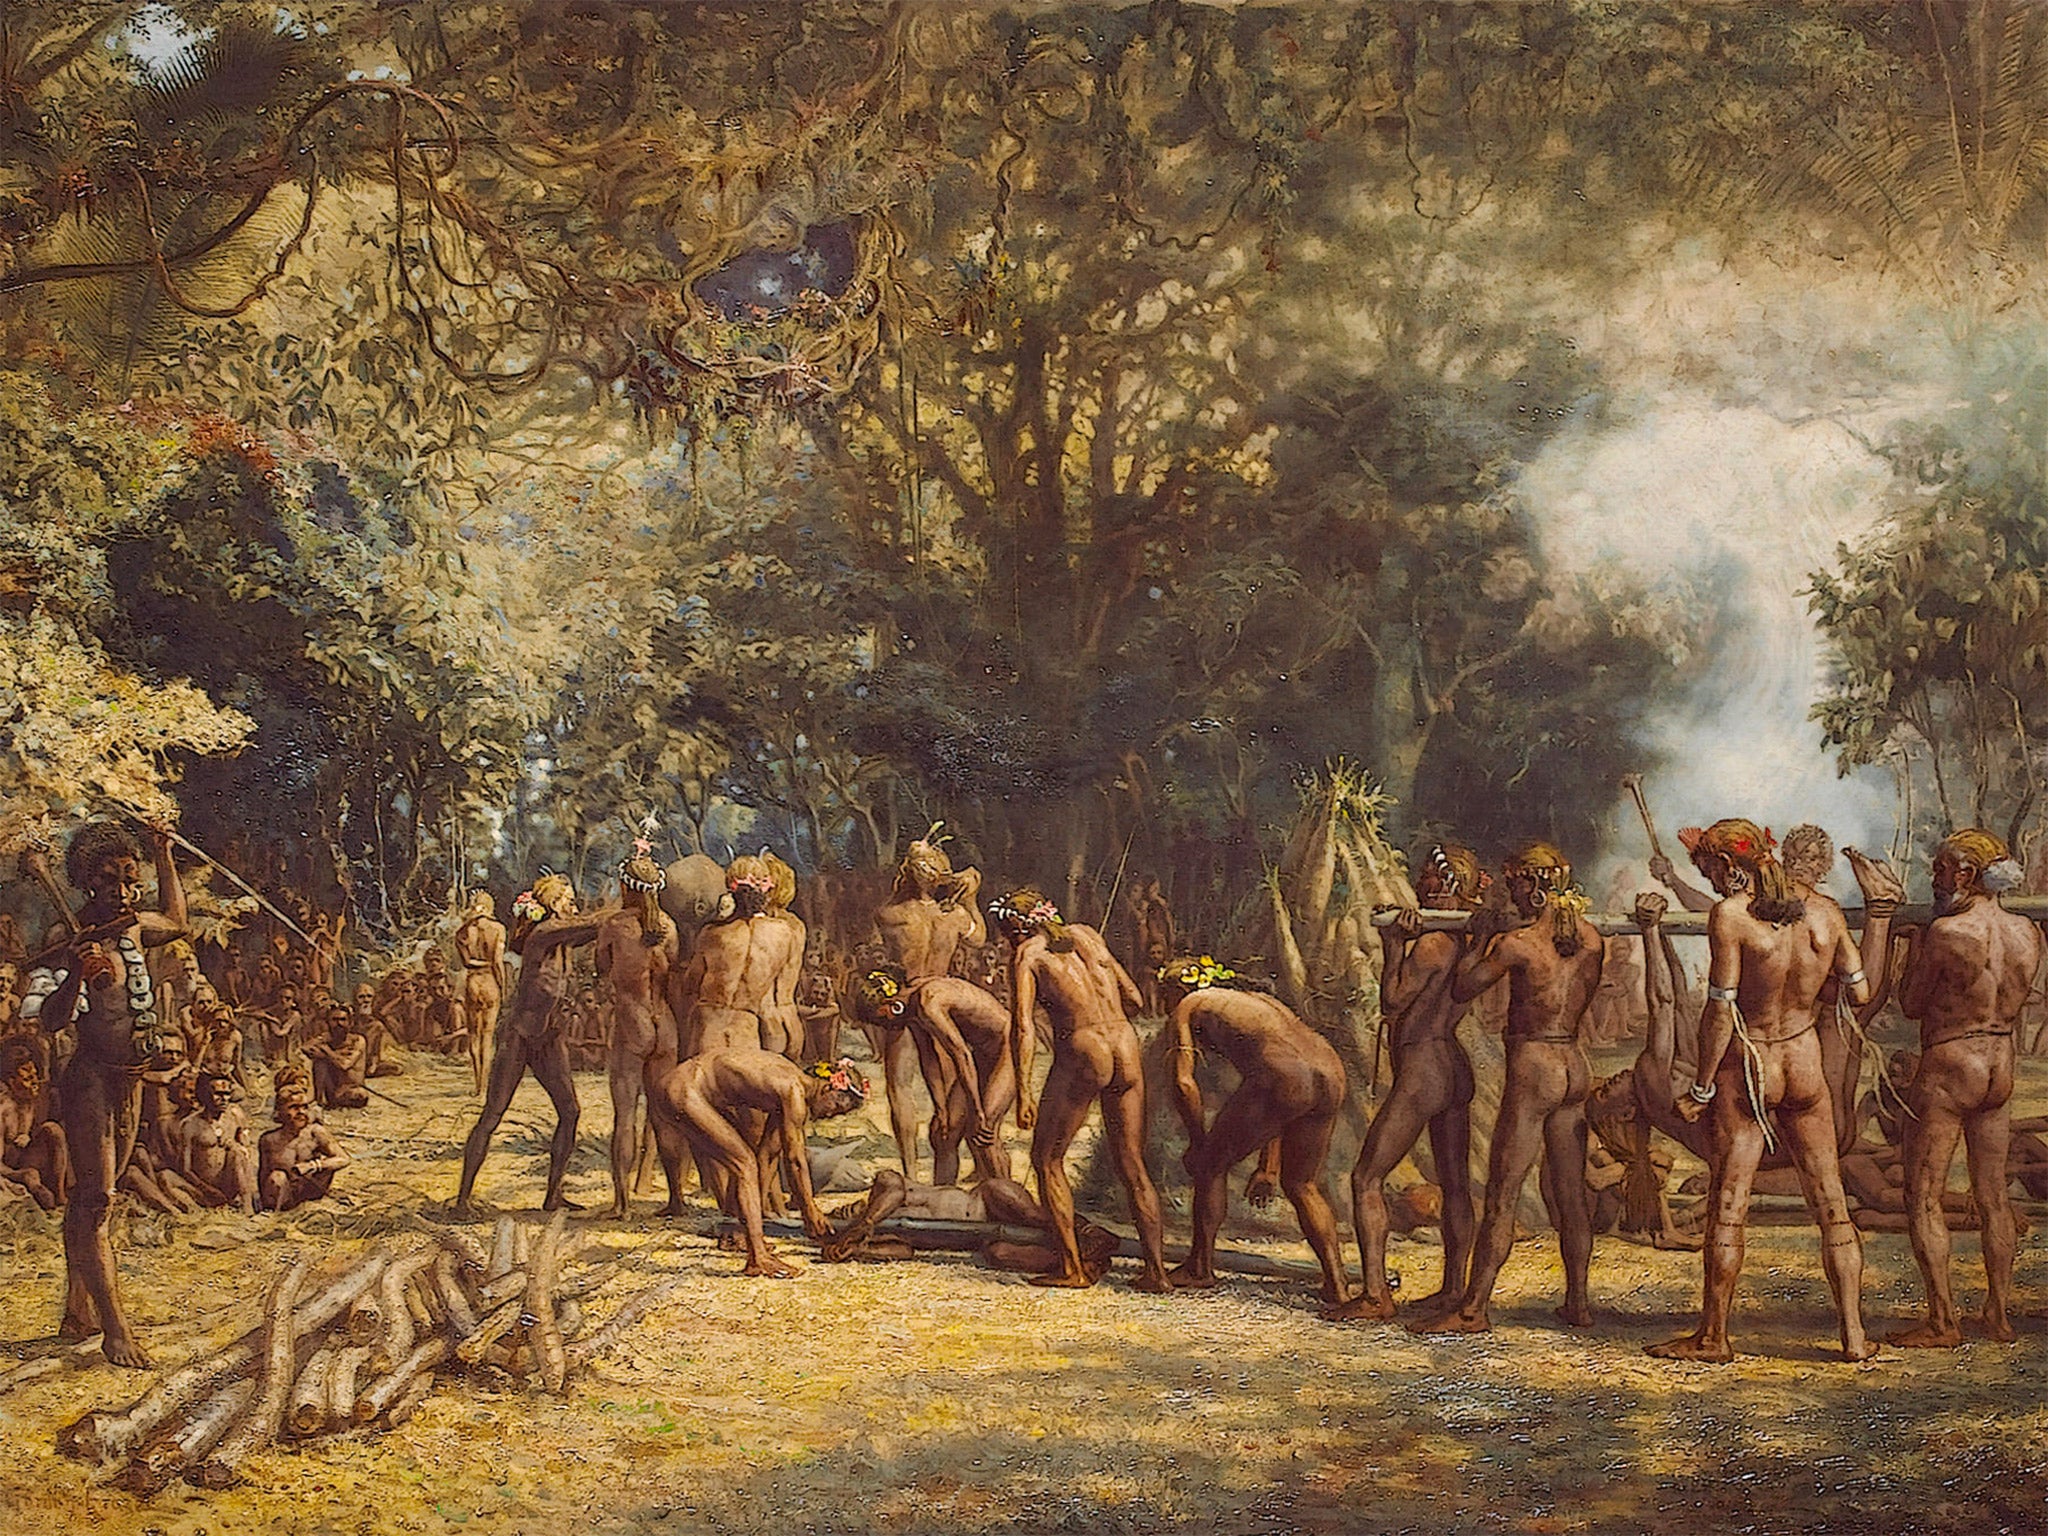 An artist's illustration of a cannibal feast in Vanuatu, in the South Pacific Ocean, about 1600 miles from Papa New Guinea